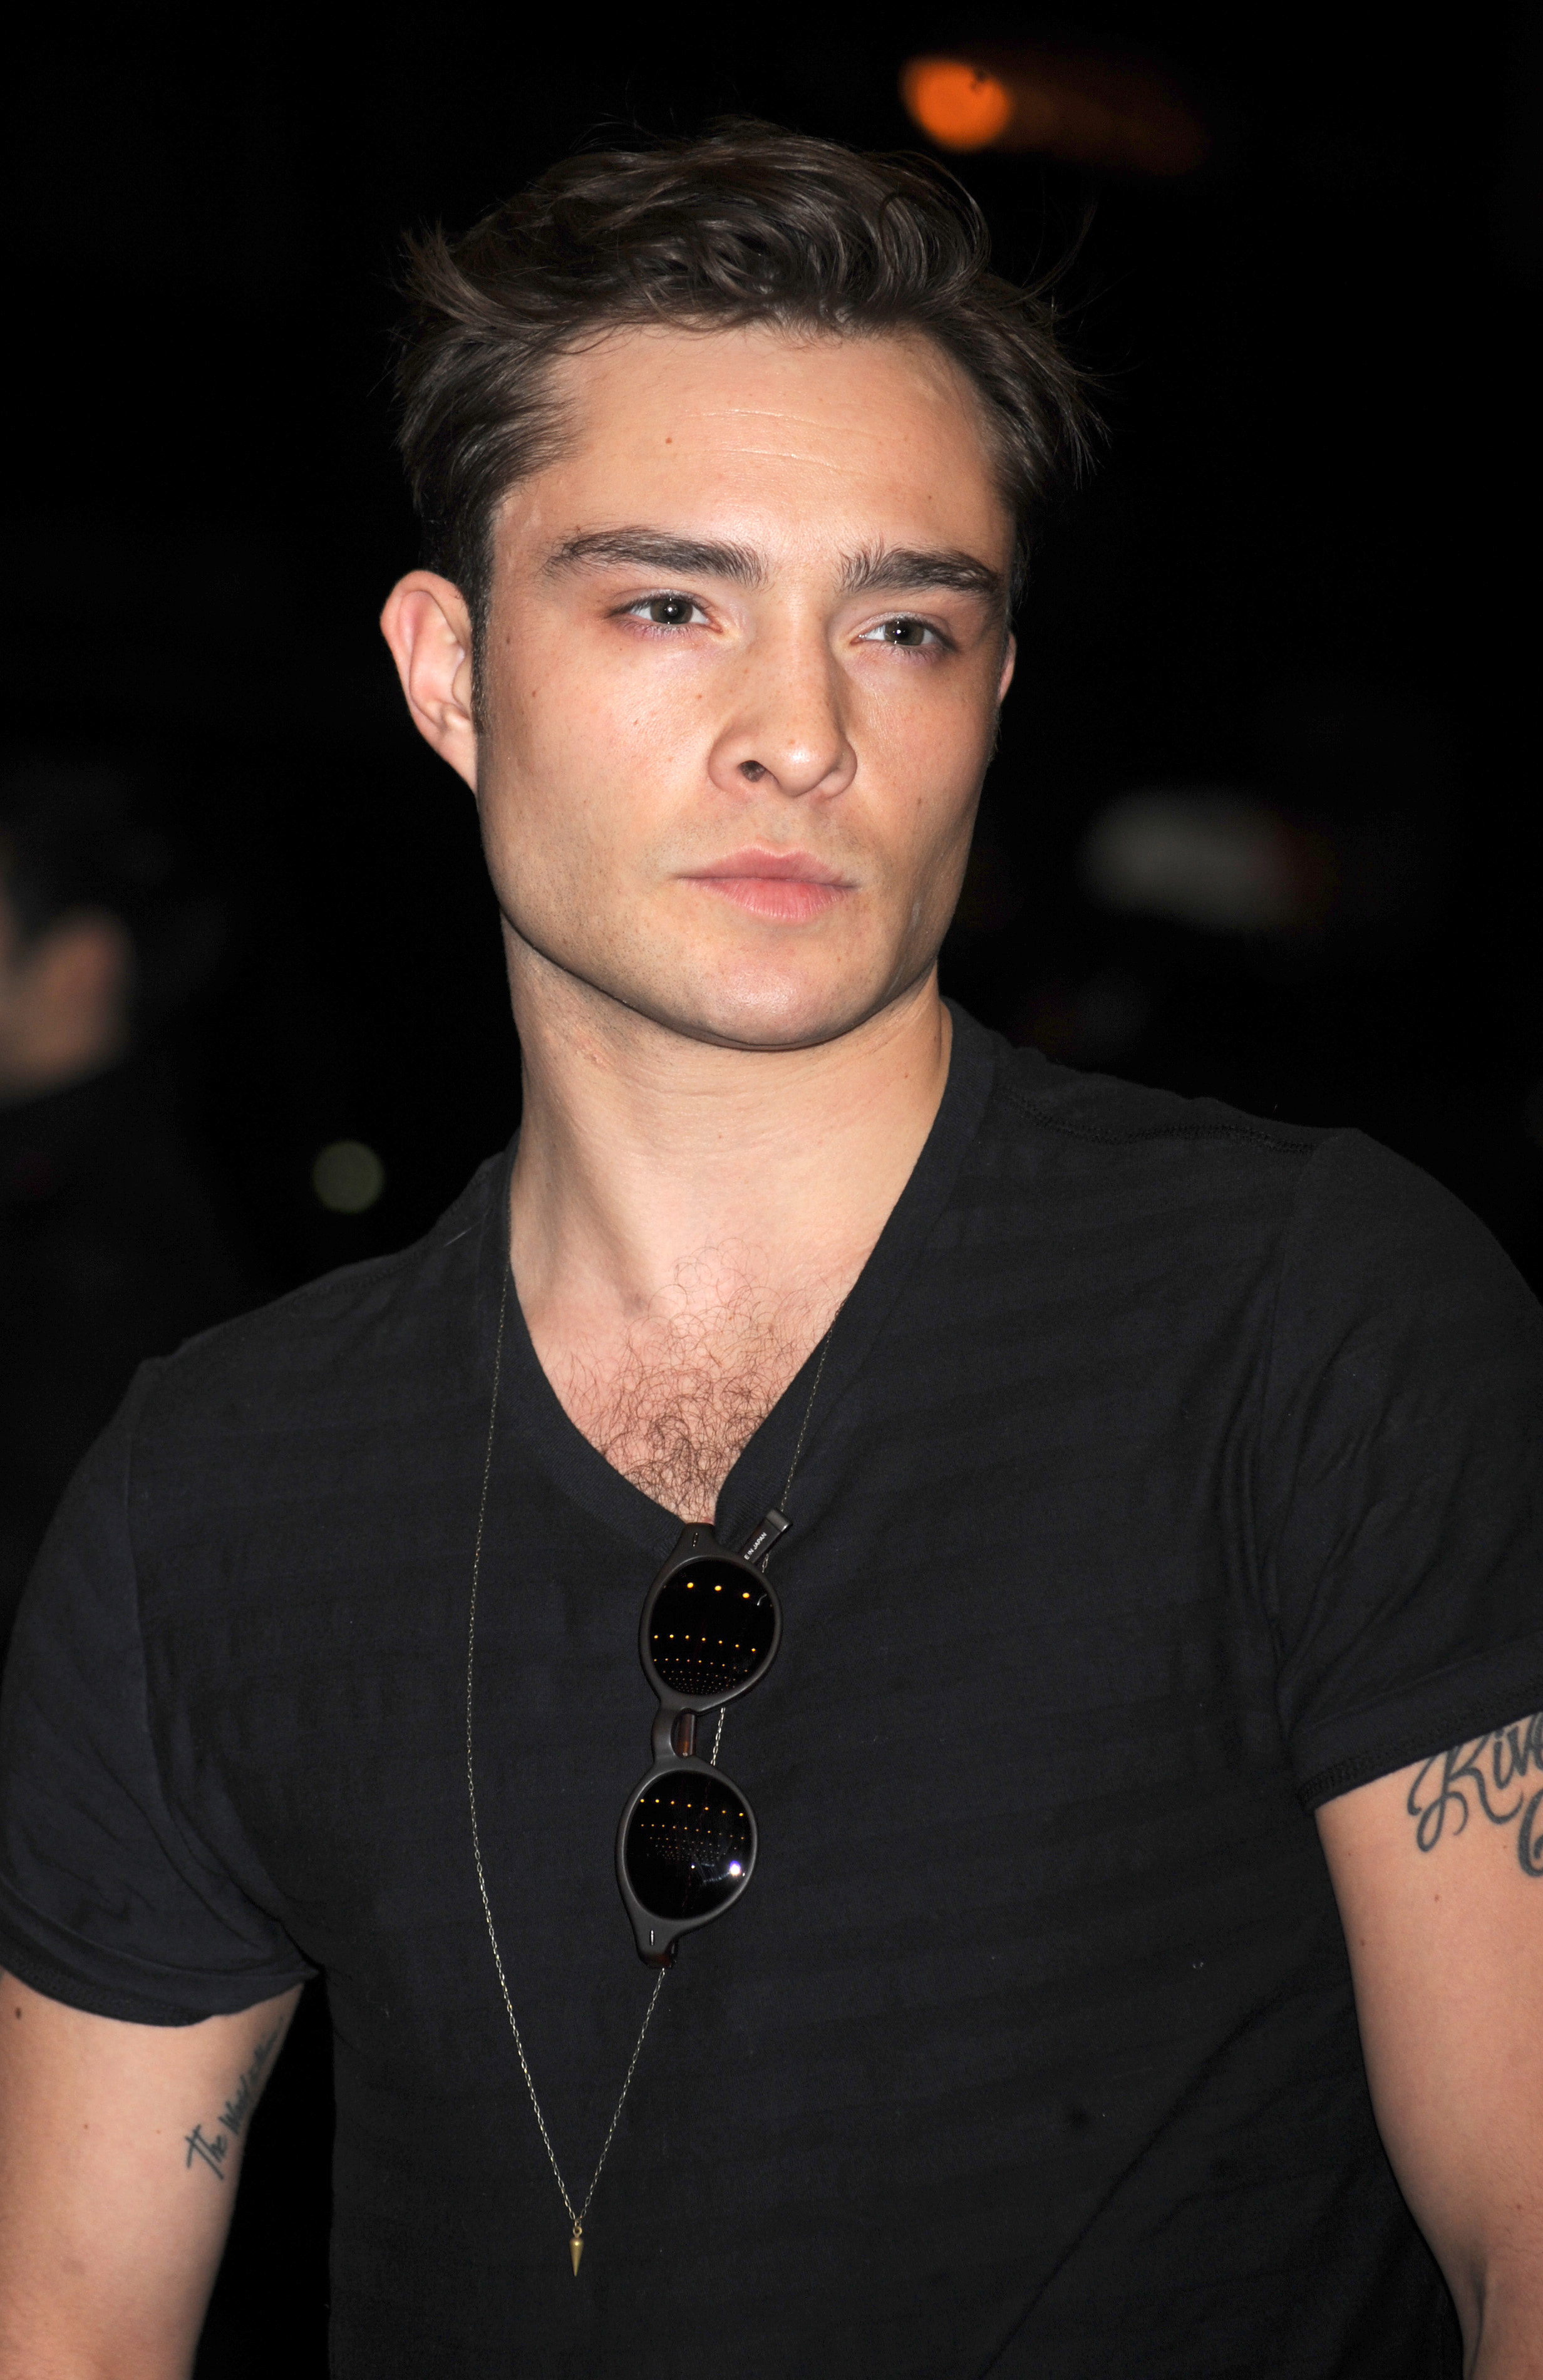 Ed Westwick photo 860 of 1473 pics, wallpaper - photo #538077 - ThePlace2